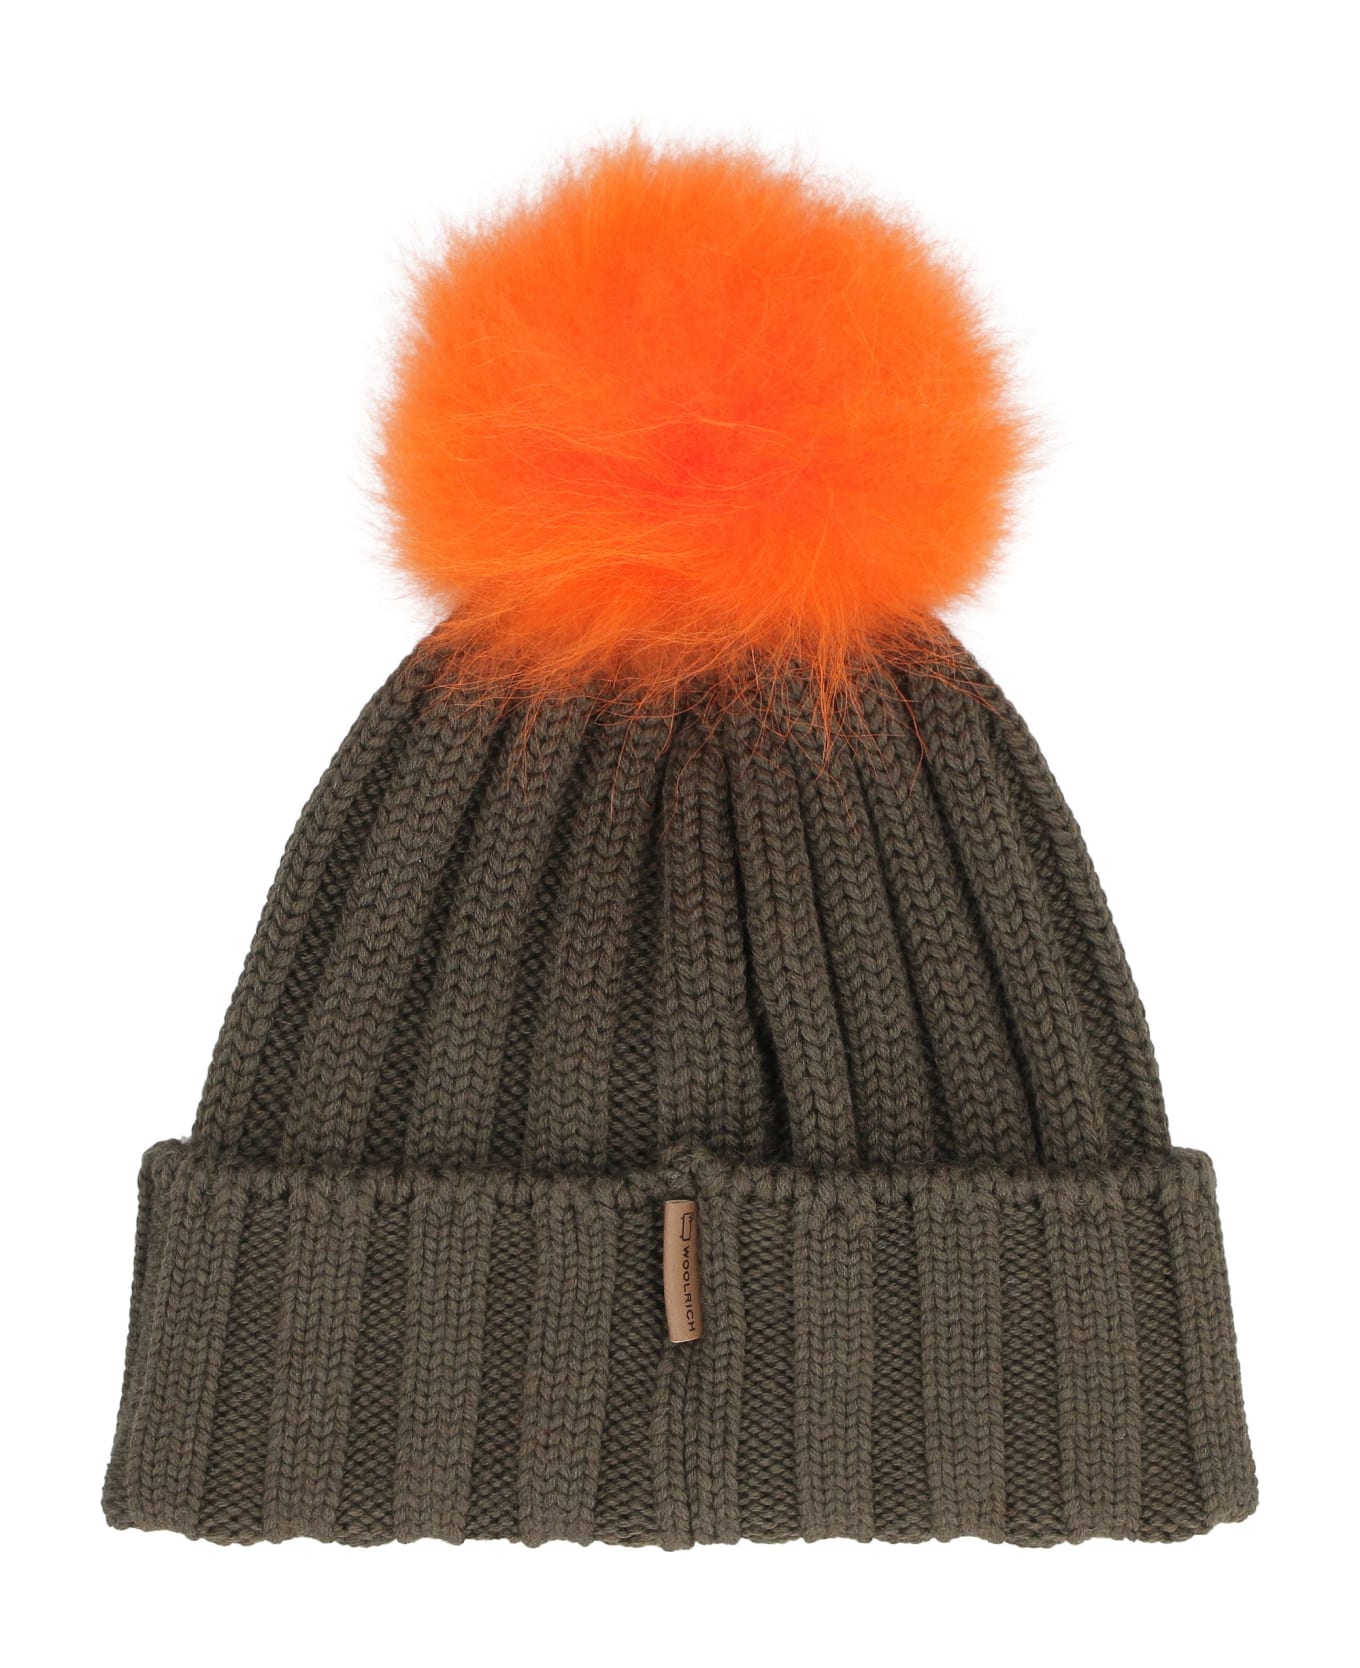 Woolrich Knitted Wool Hat With Pom-pom - green 帽子